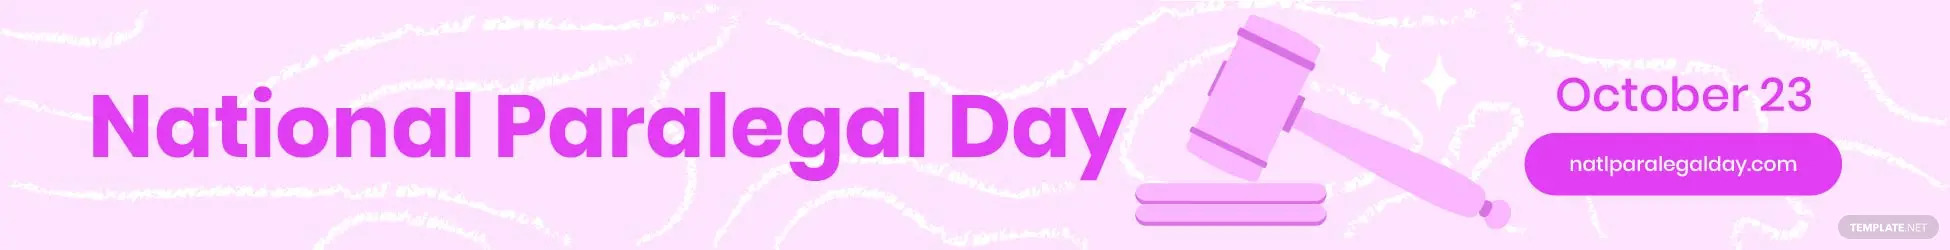 national paralegal day website banner ideas examples